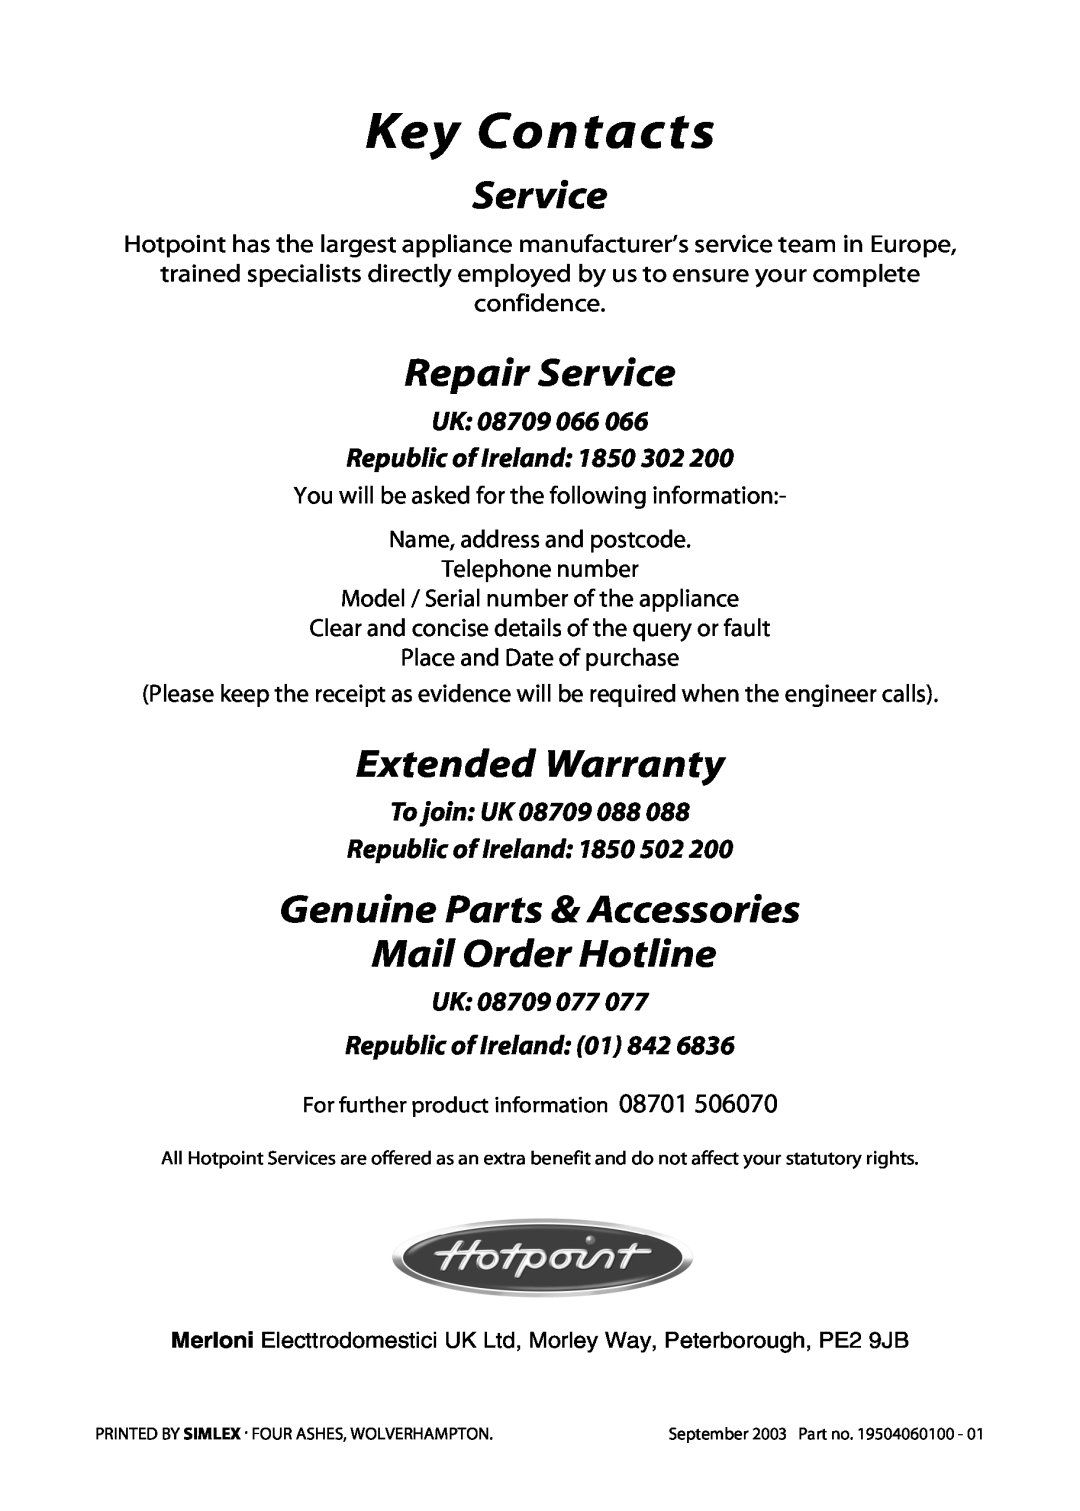 Hotpoint EW63, EW82 Key Contacts, Repair Service, Extended Warranty, Genuine Parts & Accessories Mail Order Hotline 